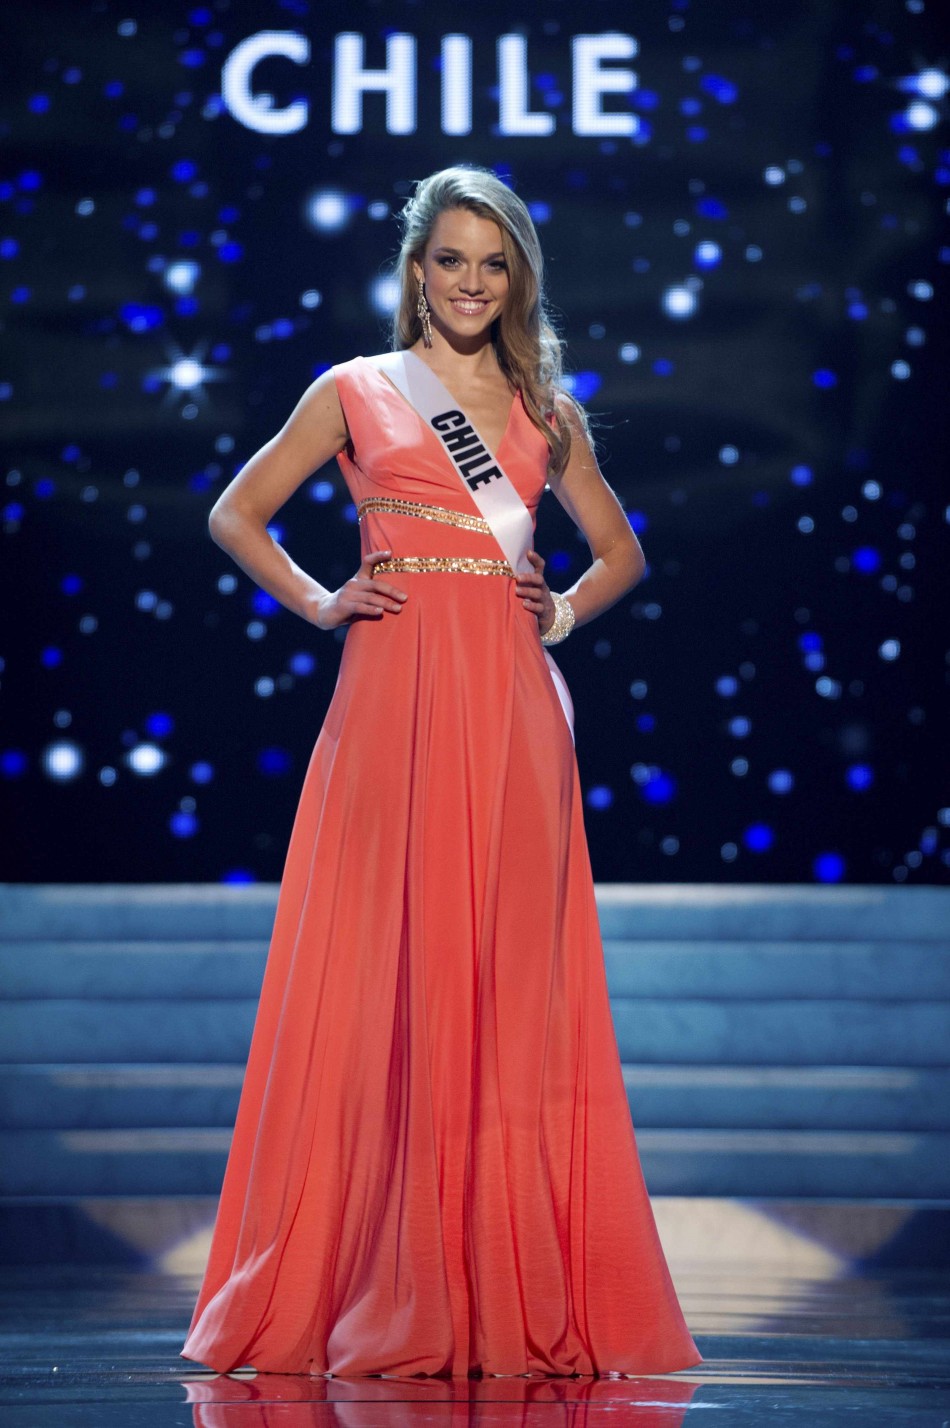 Miss Chile 2012 Konig competes during the 2012 Miss Universe Presentation Show in Las Vegas